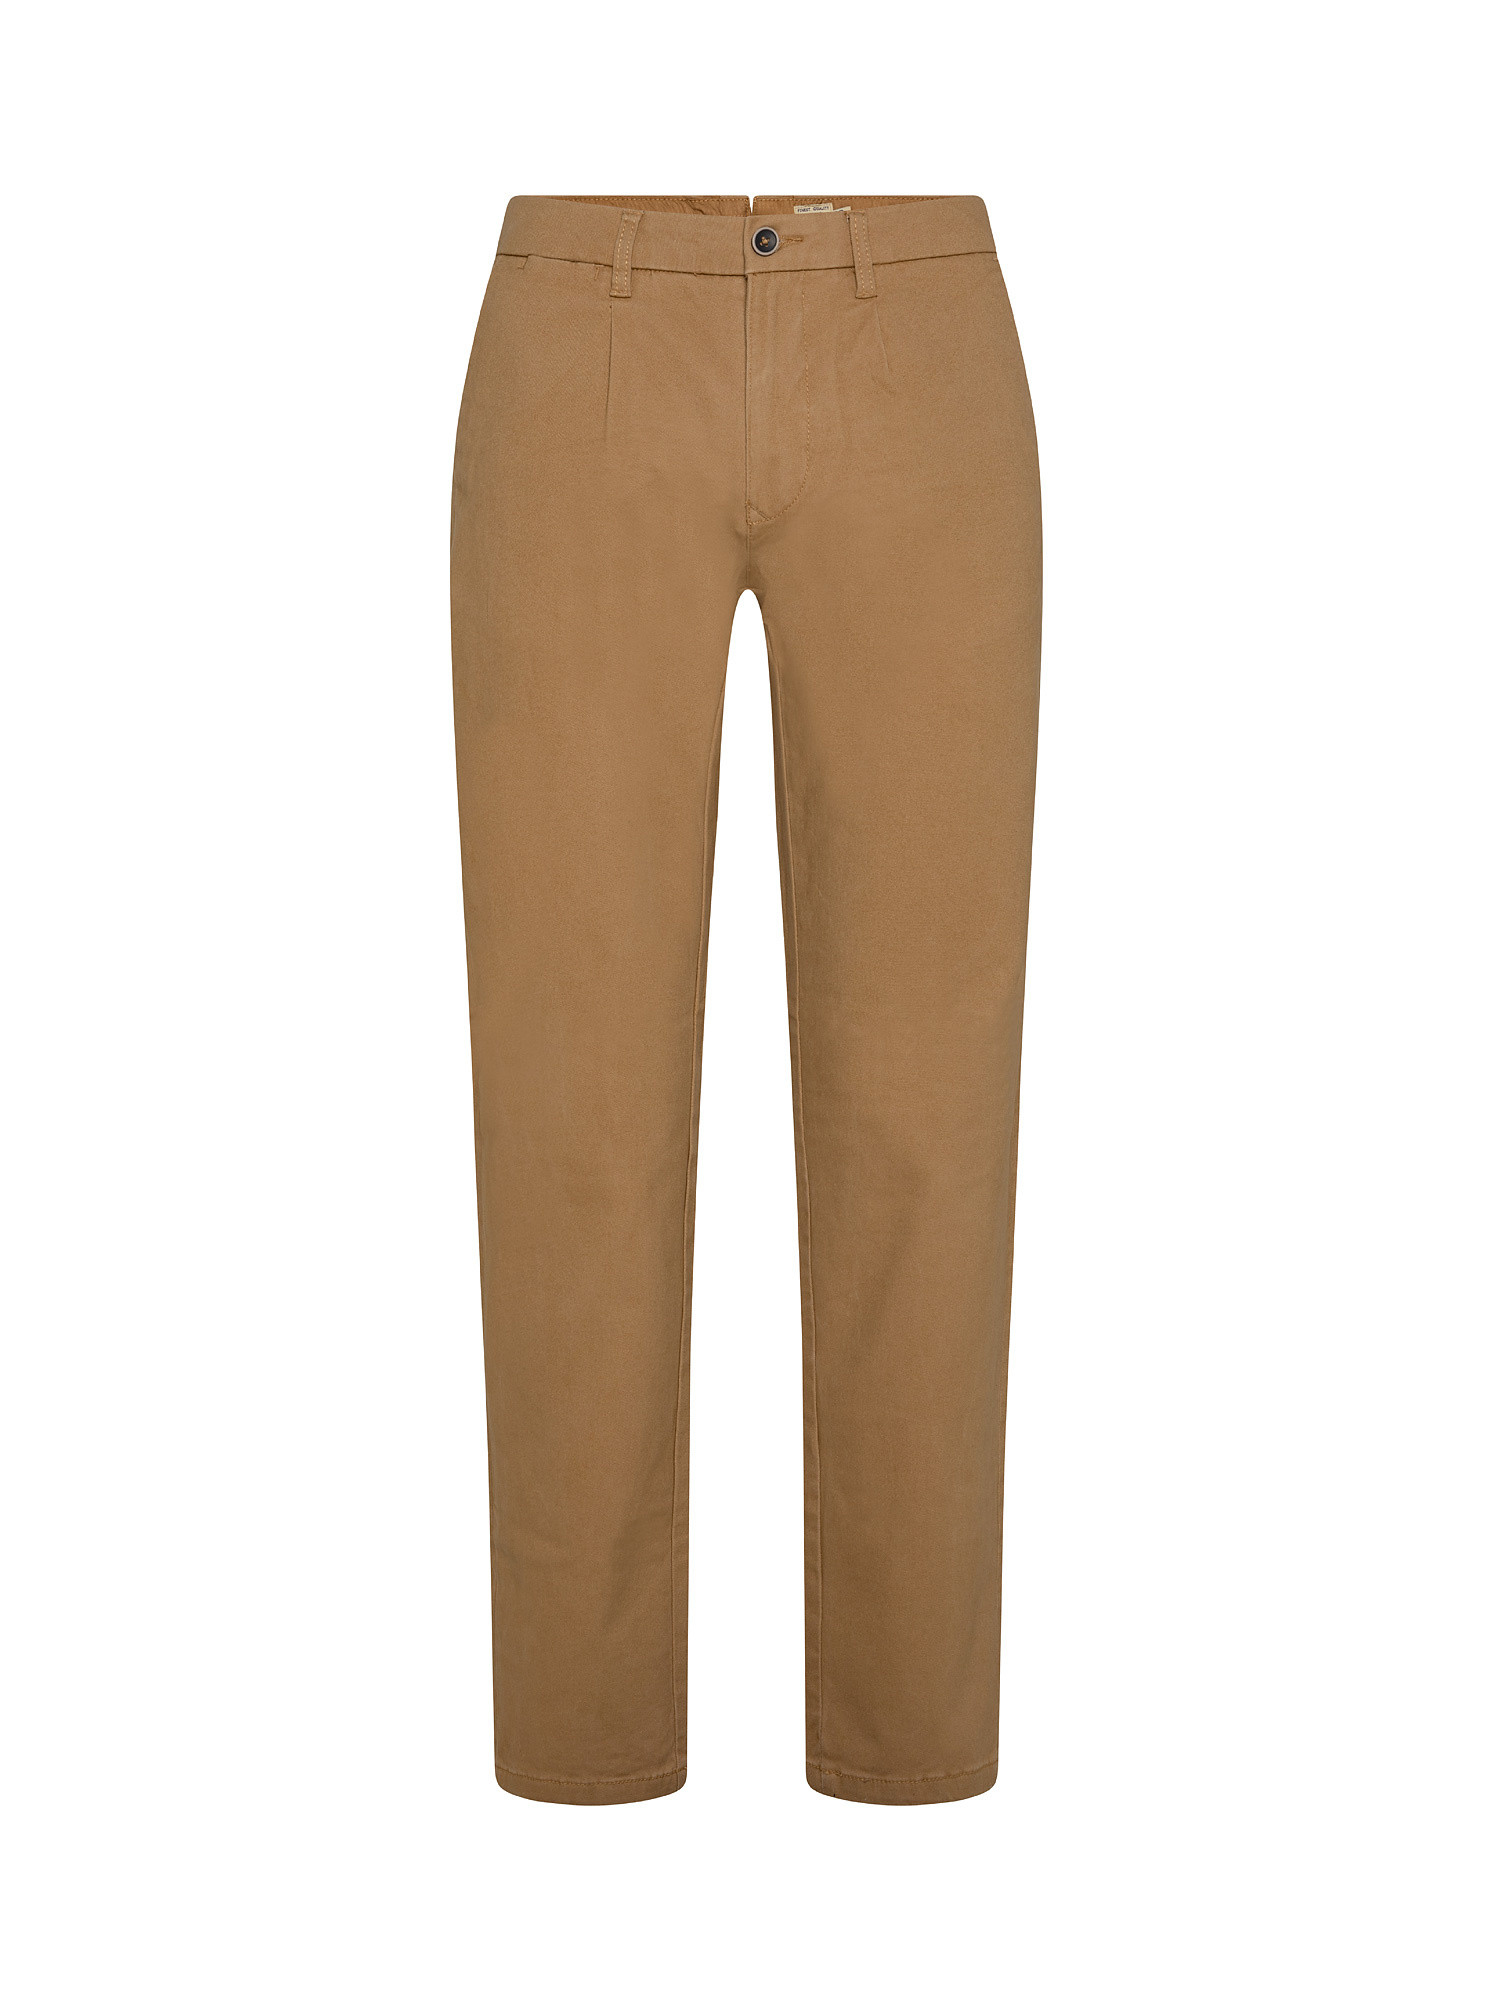 Chino trousers, Light Brown, large image number 0